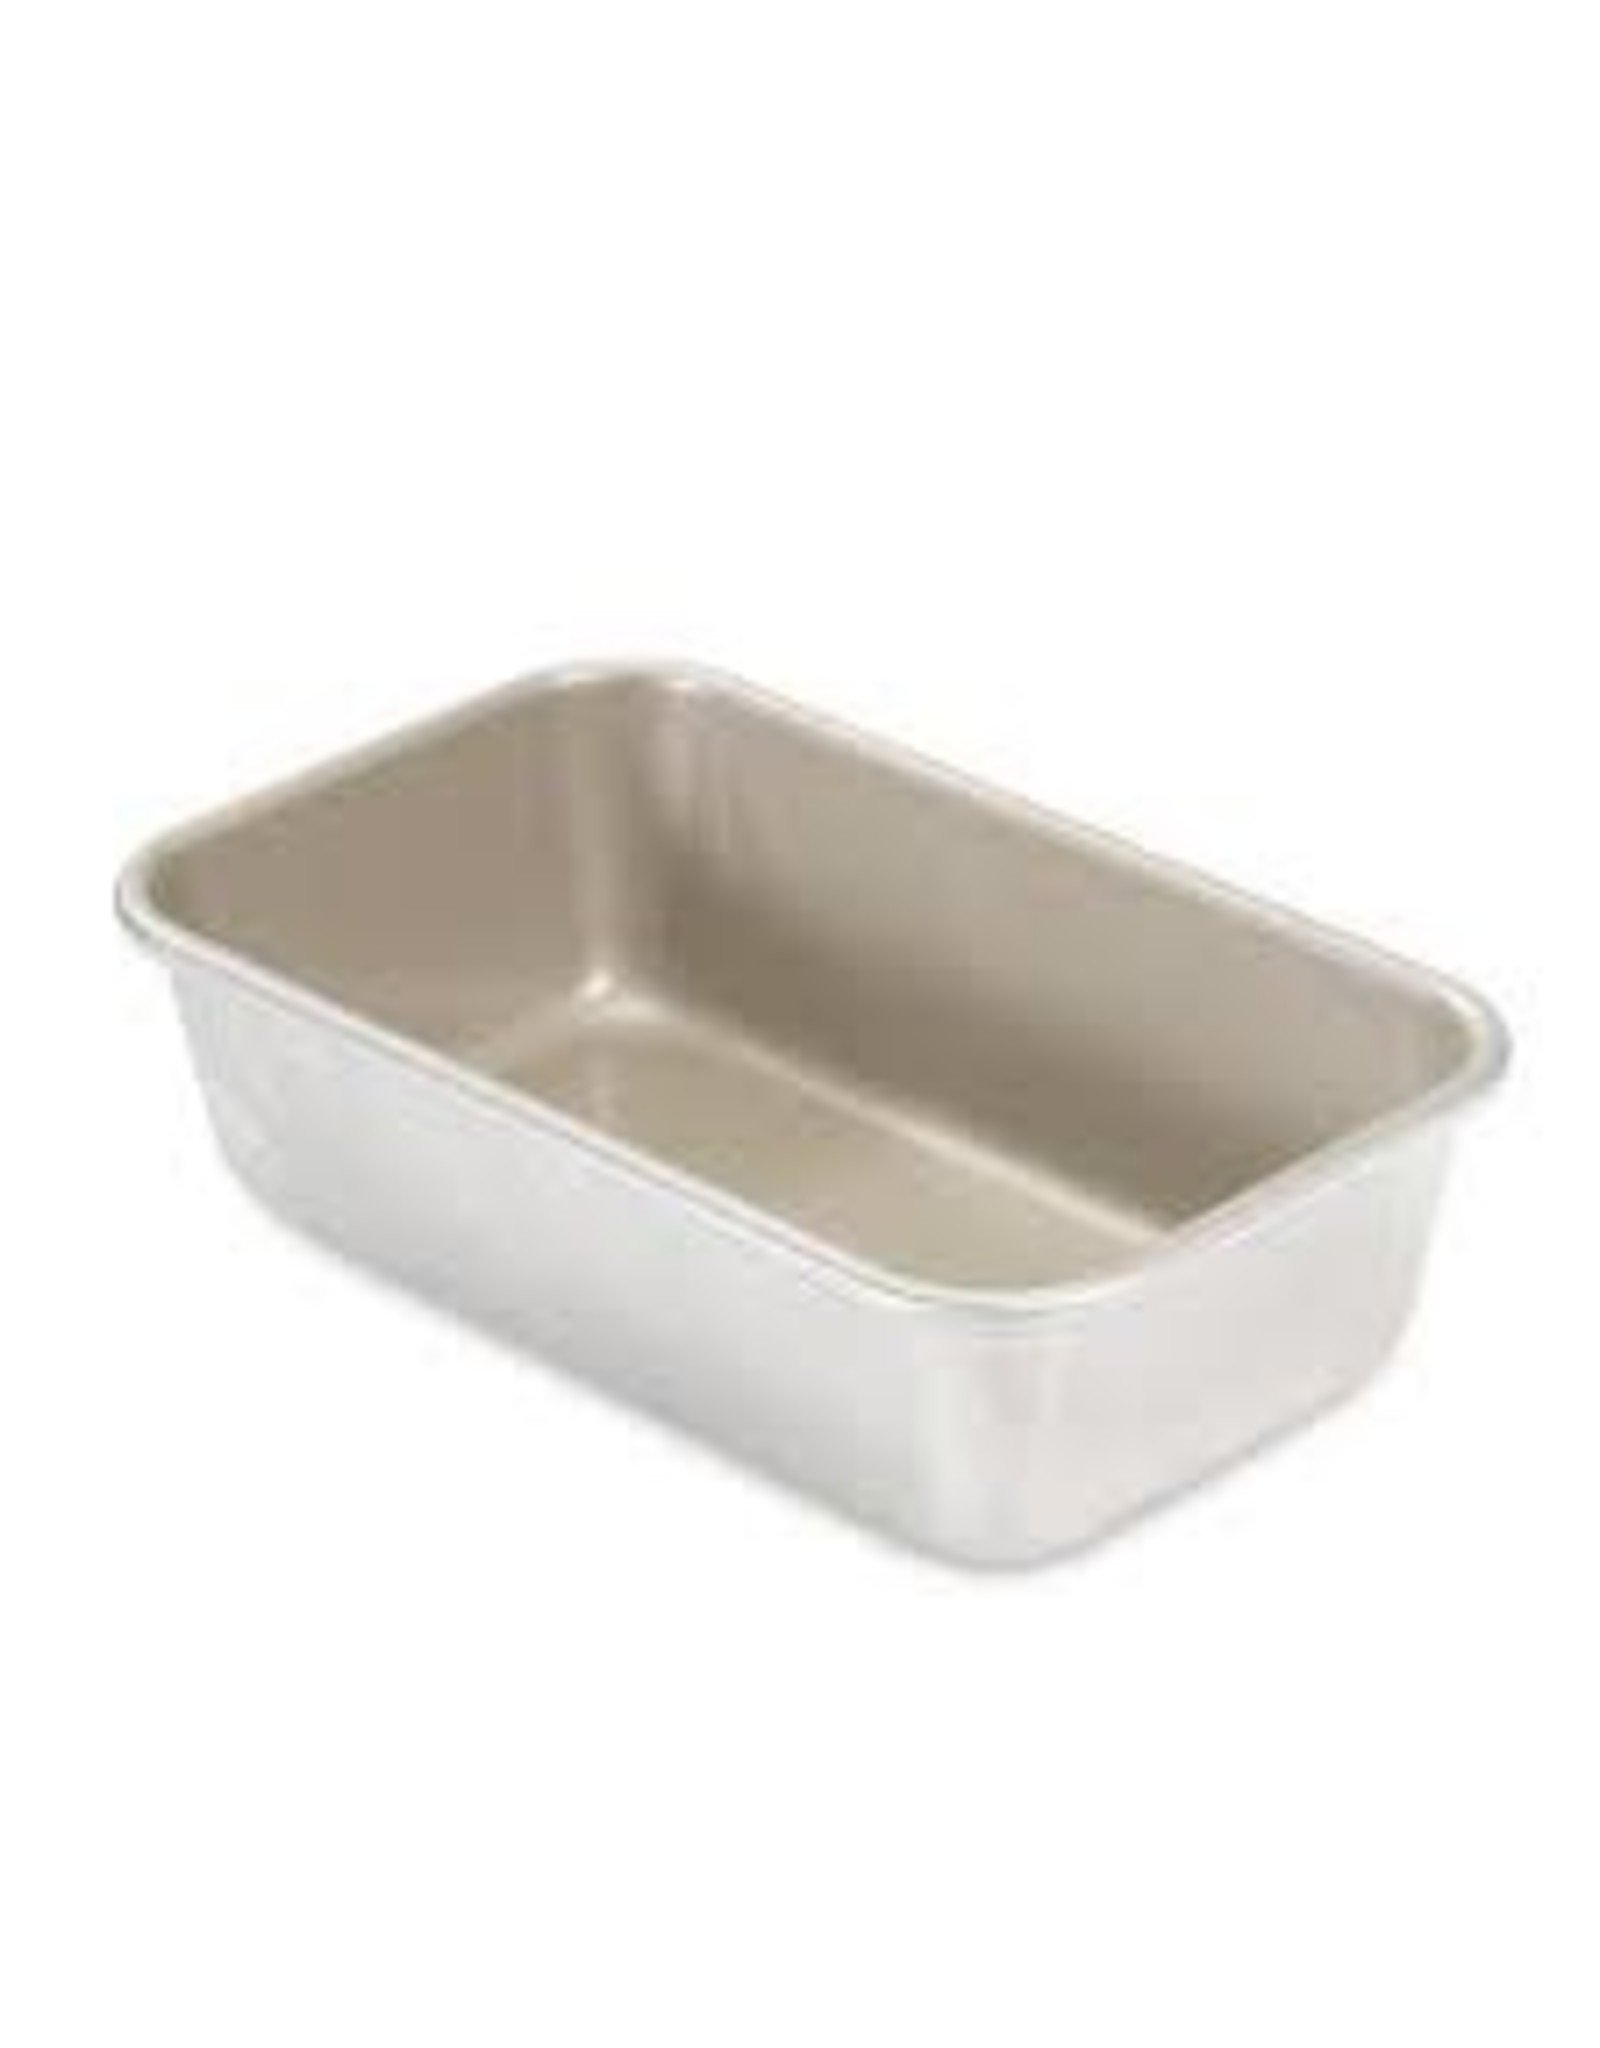 Nordicware NORDICWARE Large 1.5 Pound Loaf Pan